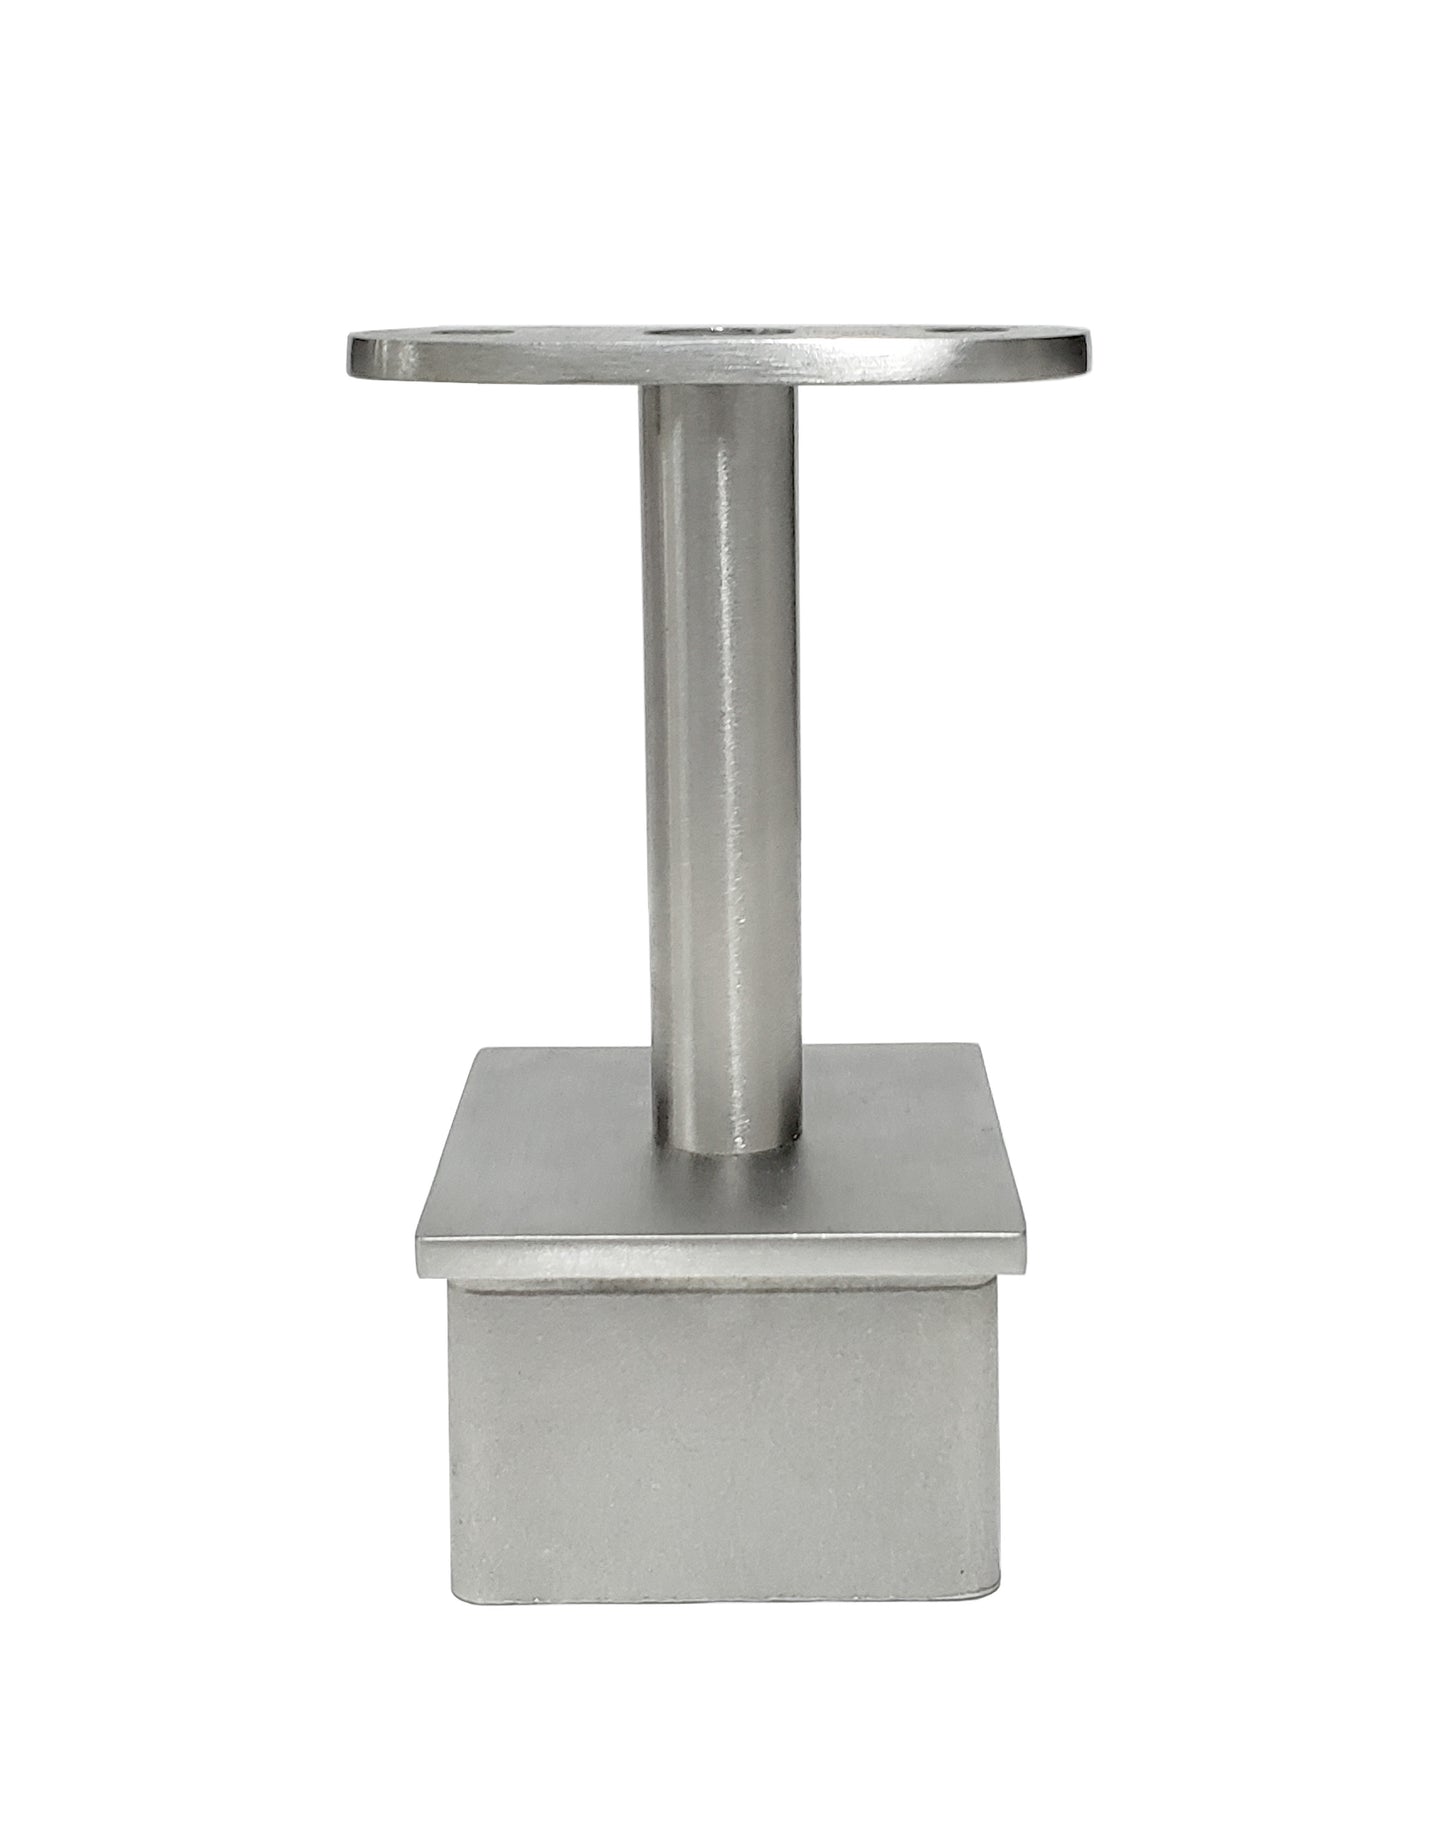 Fixed Round Stem Post Handrail Bracket Stainless Steel for 2 Post Fit